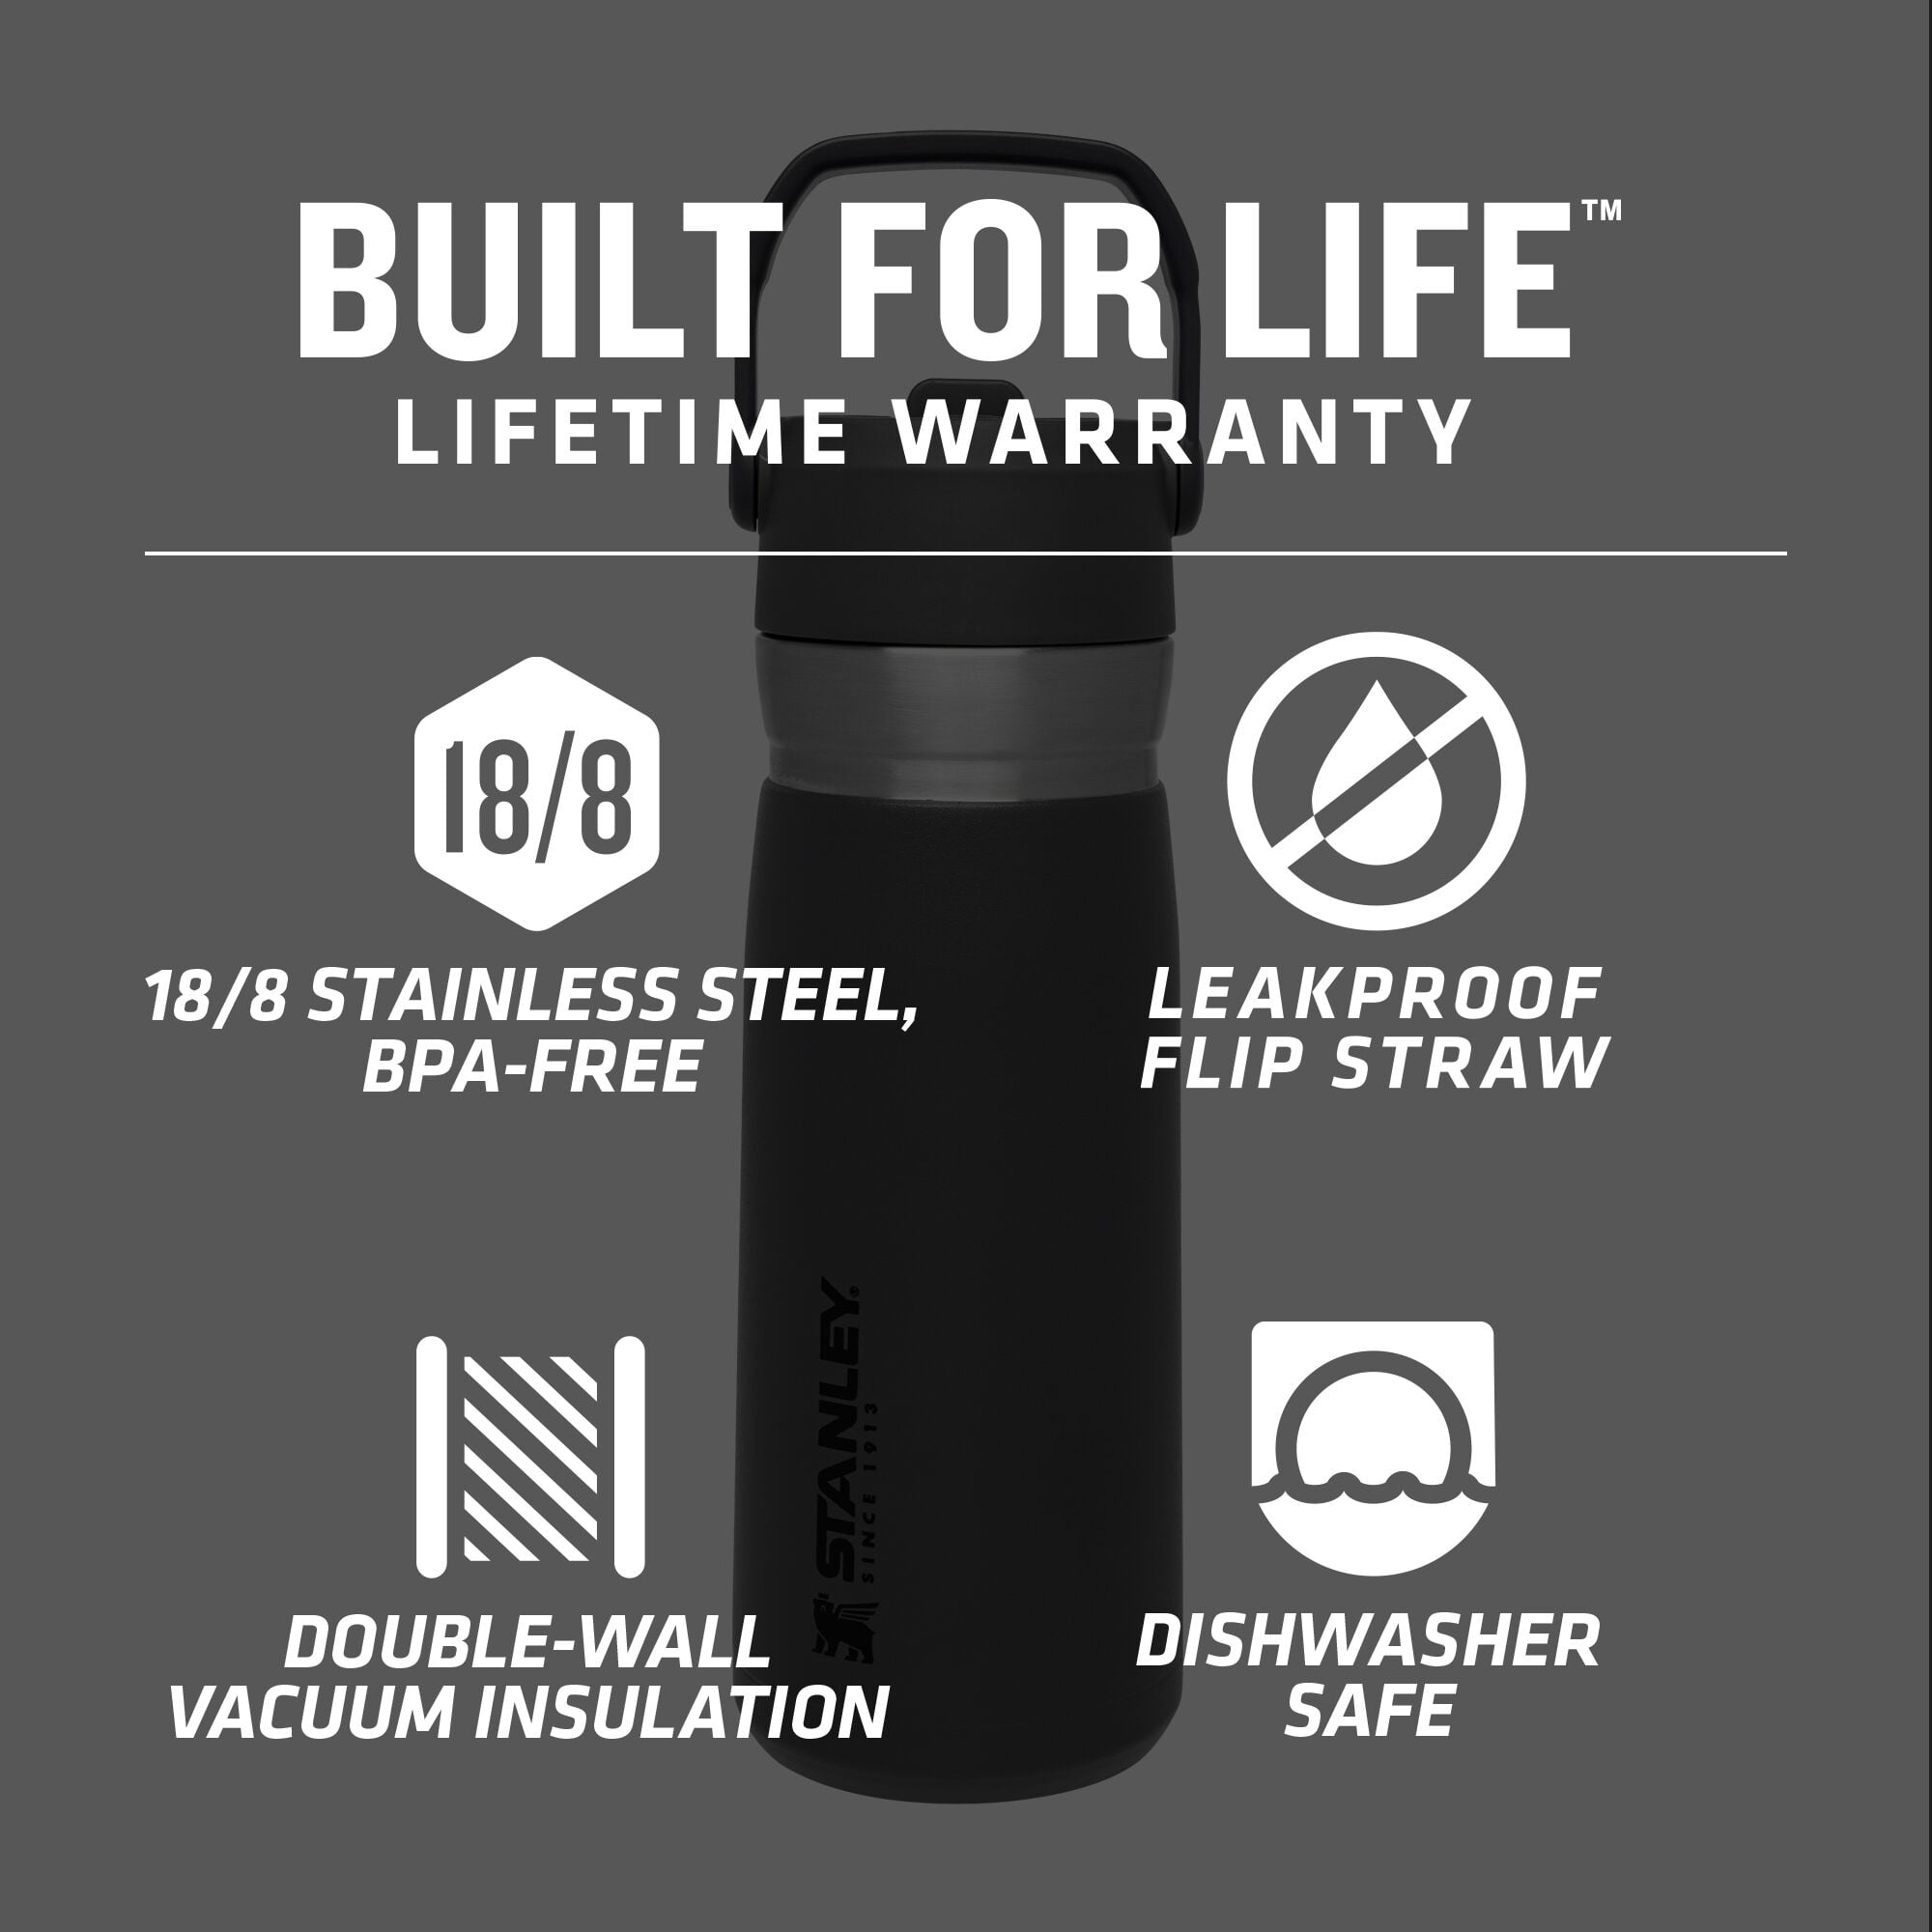 STANLEY 22 oz Lagoon Blue and Gray Insulated Stainless Steel Water Bottle  with Straw and Flip-Top Lid - Yahoo Shopping